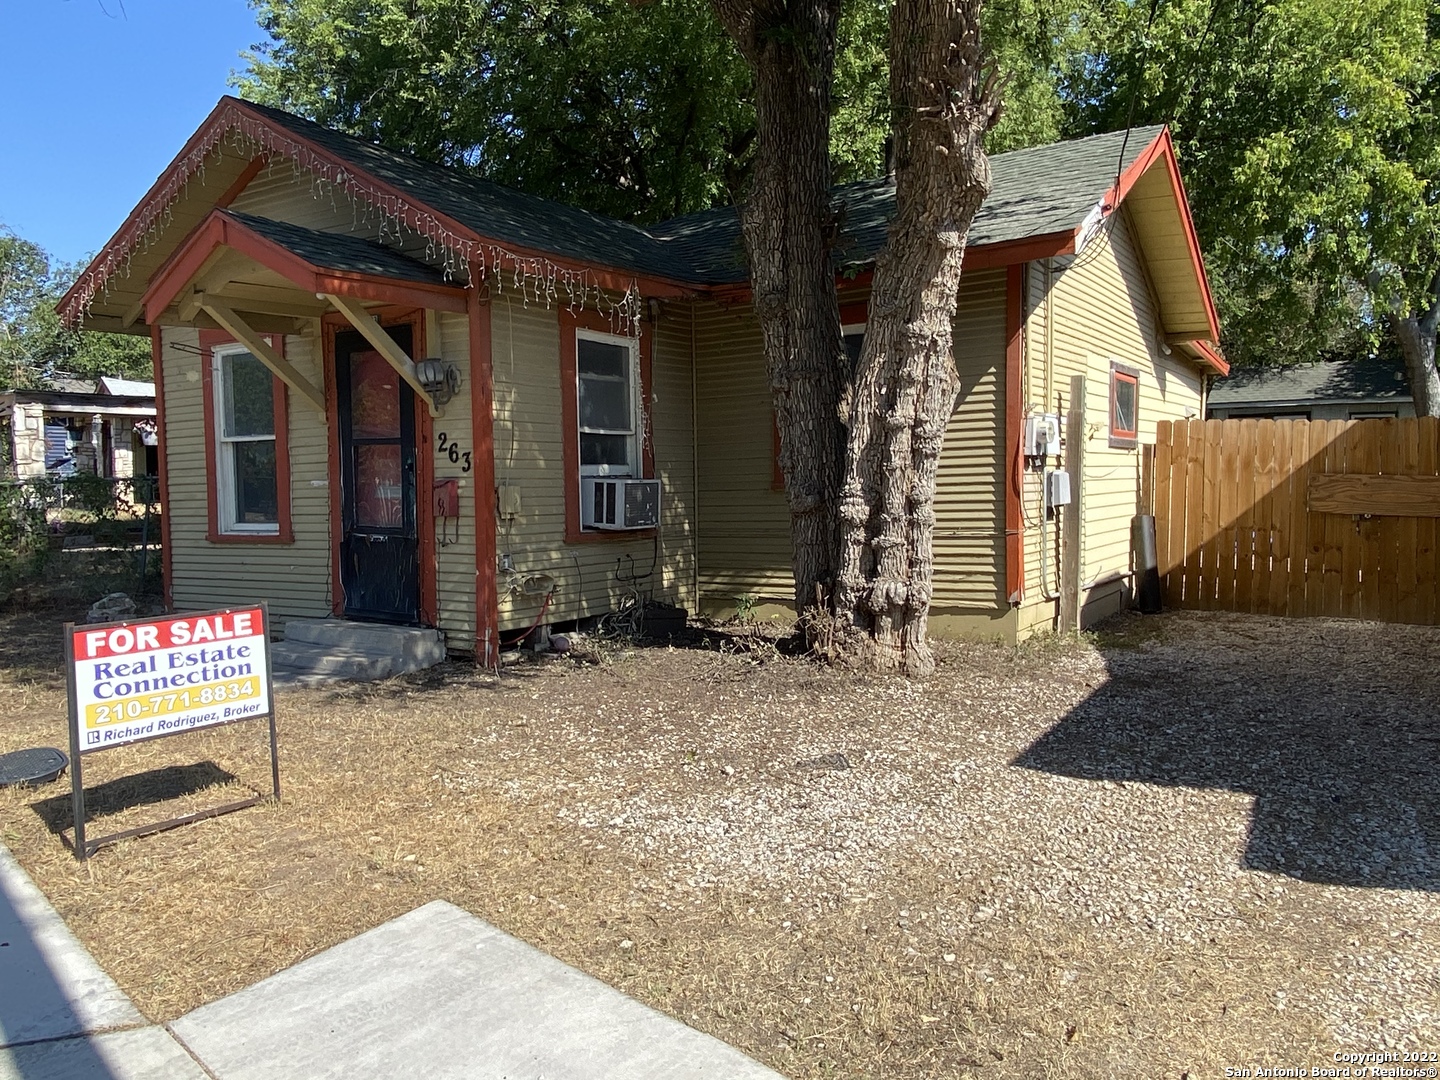 MULTIPLE OFFER SITUATION, HIGHEST AND BEST BY SATURDAY Sept 24 at 5pm. Fantastic Investor Opportunity! A One Bedroom Bungalow with room to add Sq Footage sitting on a 34 x 120 level lot! This home is being sold As Is & needs repair Located So Close to King Williams, the Alamodome, Mission Trails, the Riverwalk, Hemisfair Park, the Pearl, Lone Star Arts District, and Breckinridge Park. Fantastic Investment Opportunity Just minutes away from the San Antonio Riverwalk, Roosevelt Park, Blue Star Arts Complex, Southtown, San Pedro Creek Project, and Central Downtown San Antonio Hipster Entertainment District. Remodel or spruce up and rent out this one bedroom in a Fantastic Location. Add sq footage to maximize this flip. Look at the retail Comps per sq ft in this area! Hard to find an investment property at this price in Lone Star.